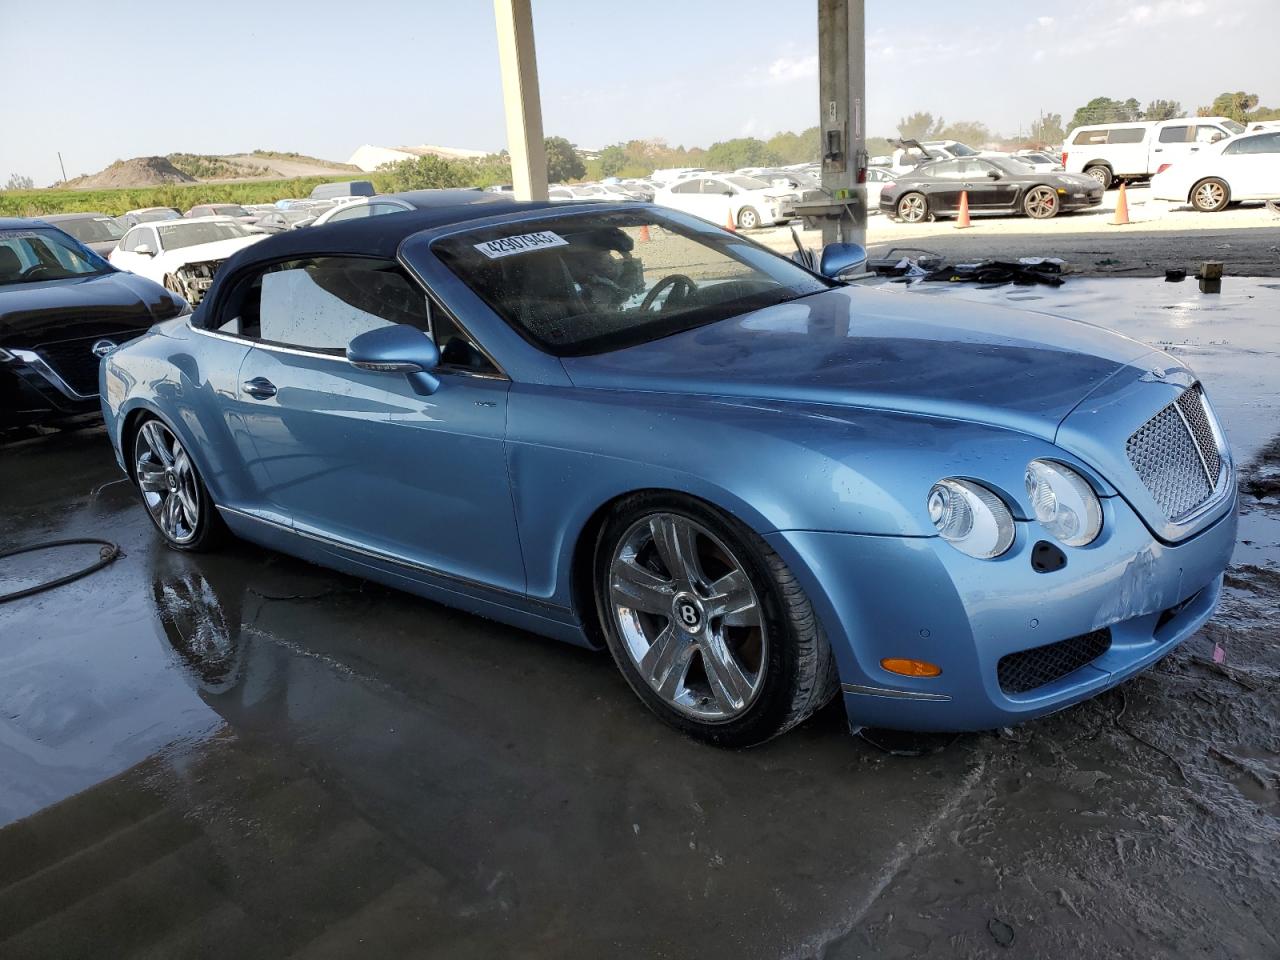 Salvage 2008 Bentley Continental GTC - Blue Convertible - Front Three-Quarter View